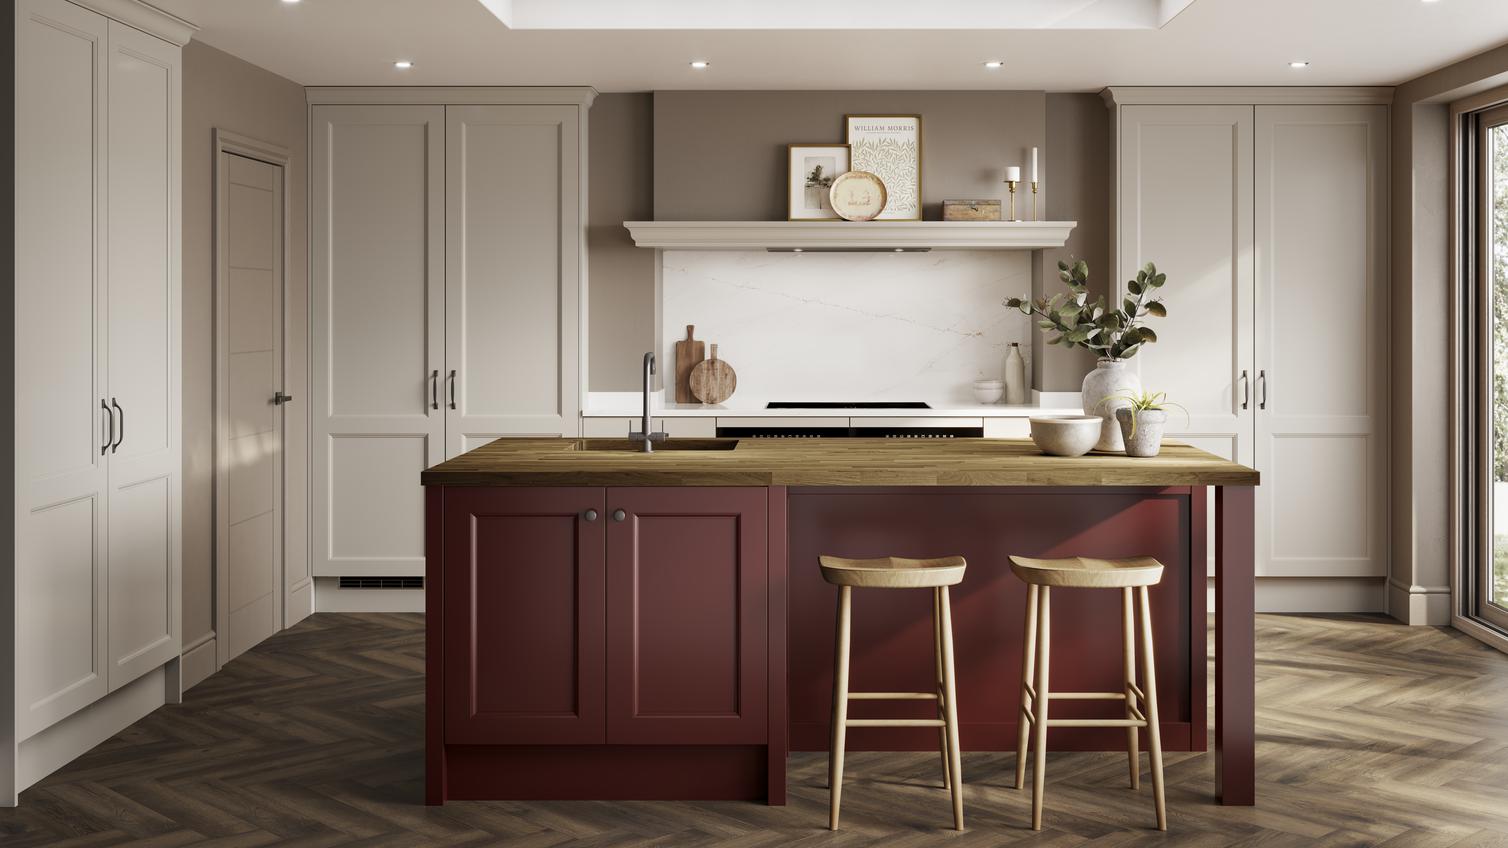 Cream shaker kitchen in an L-shaped layout, with garnet red island and chevron floors. The island has a wood-effect worktop. 